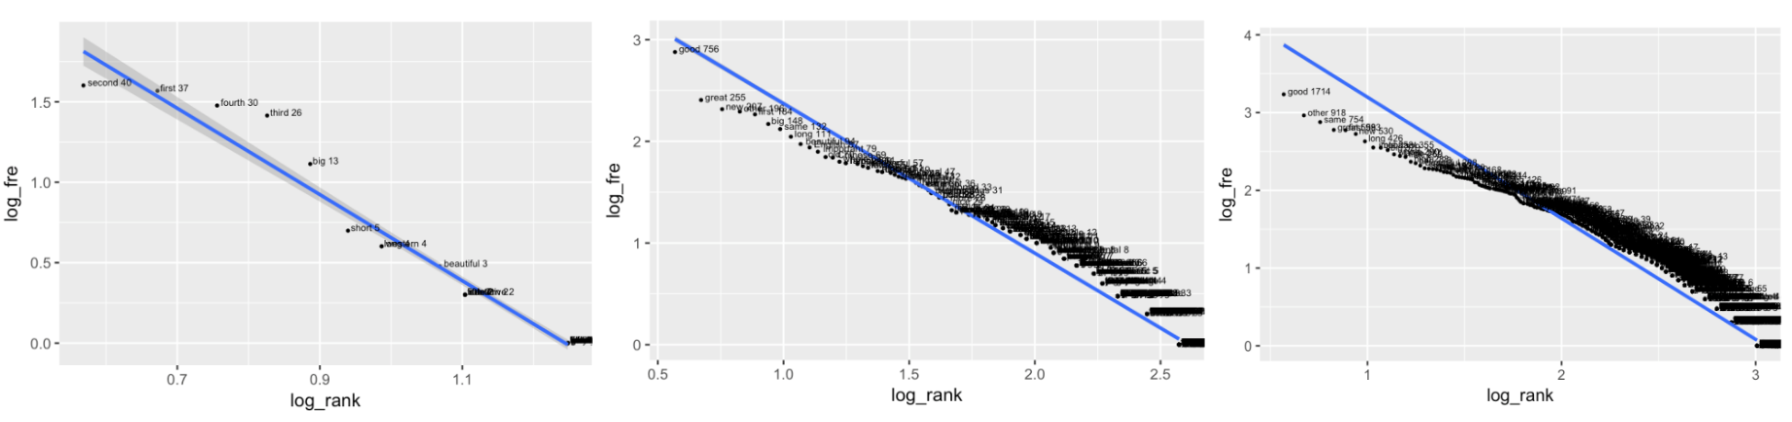 Log Frequency vs. Log Adjusted Frequency Rank for Adjectives in AAN in the EL Dataset (left), MS Dataset (center), and UN Dataset (right)